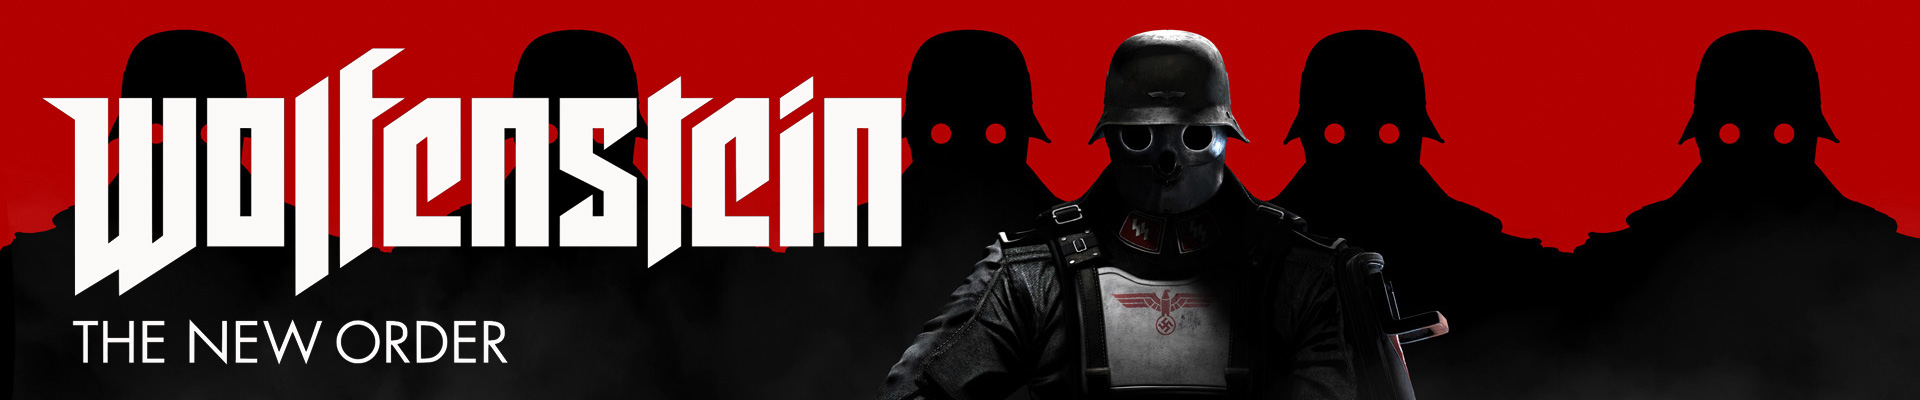 Psyched about: Wolfenstein: The New Order